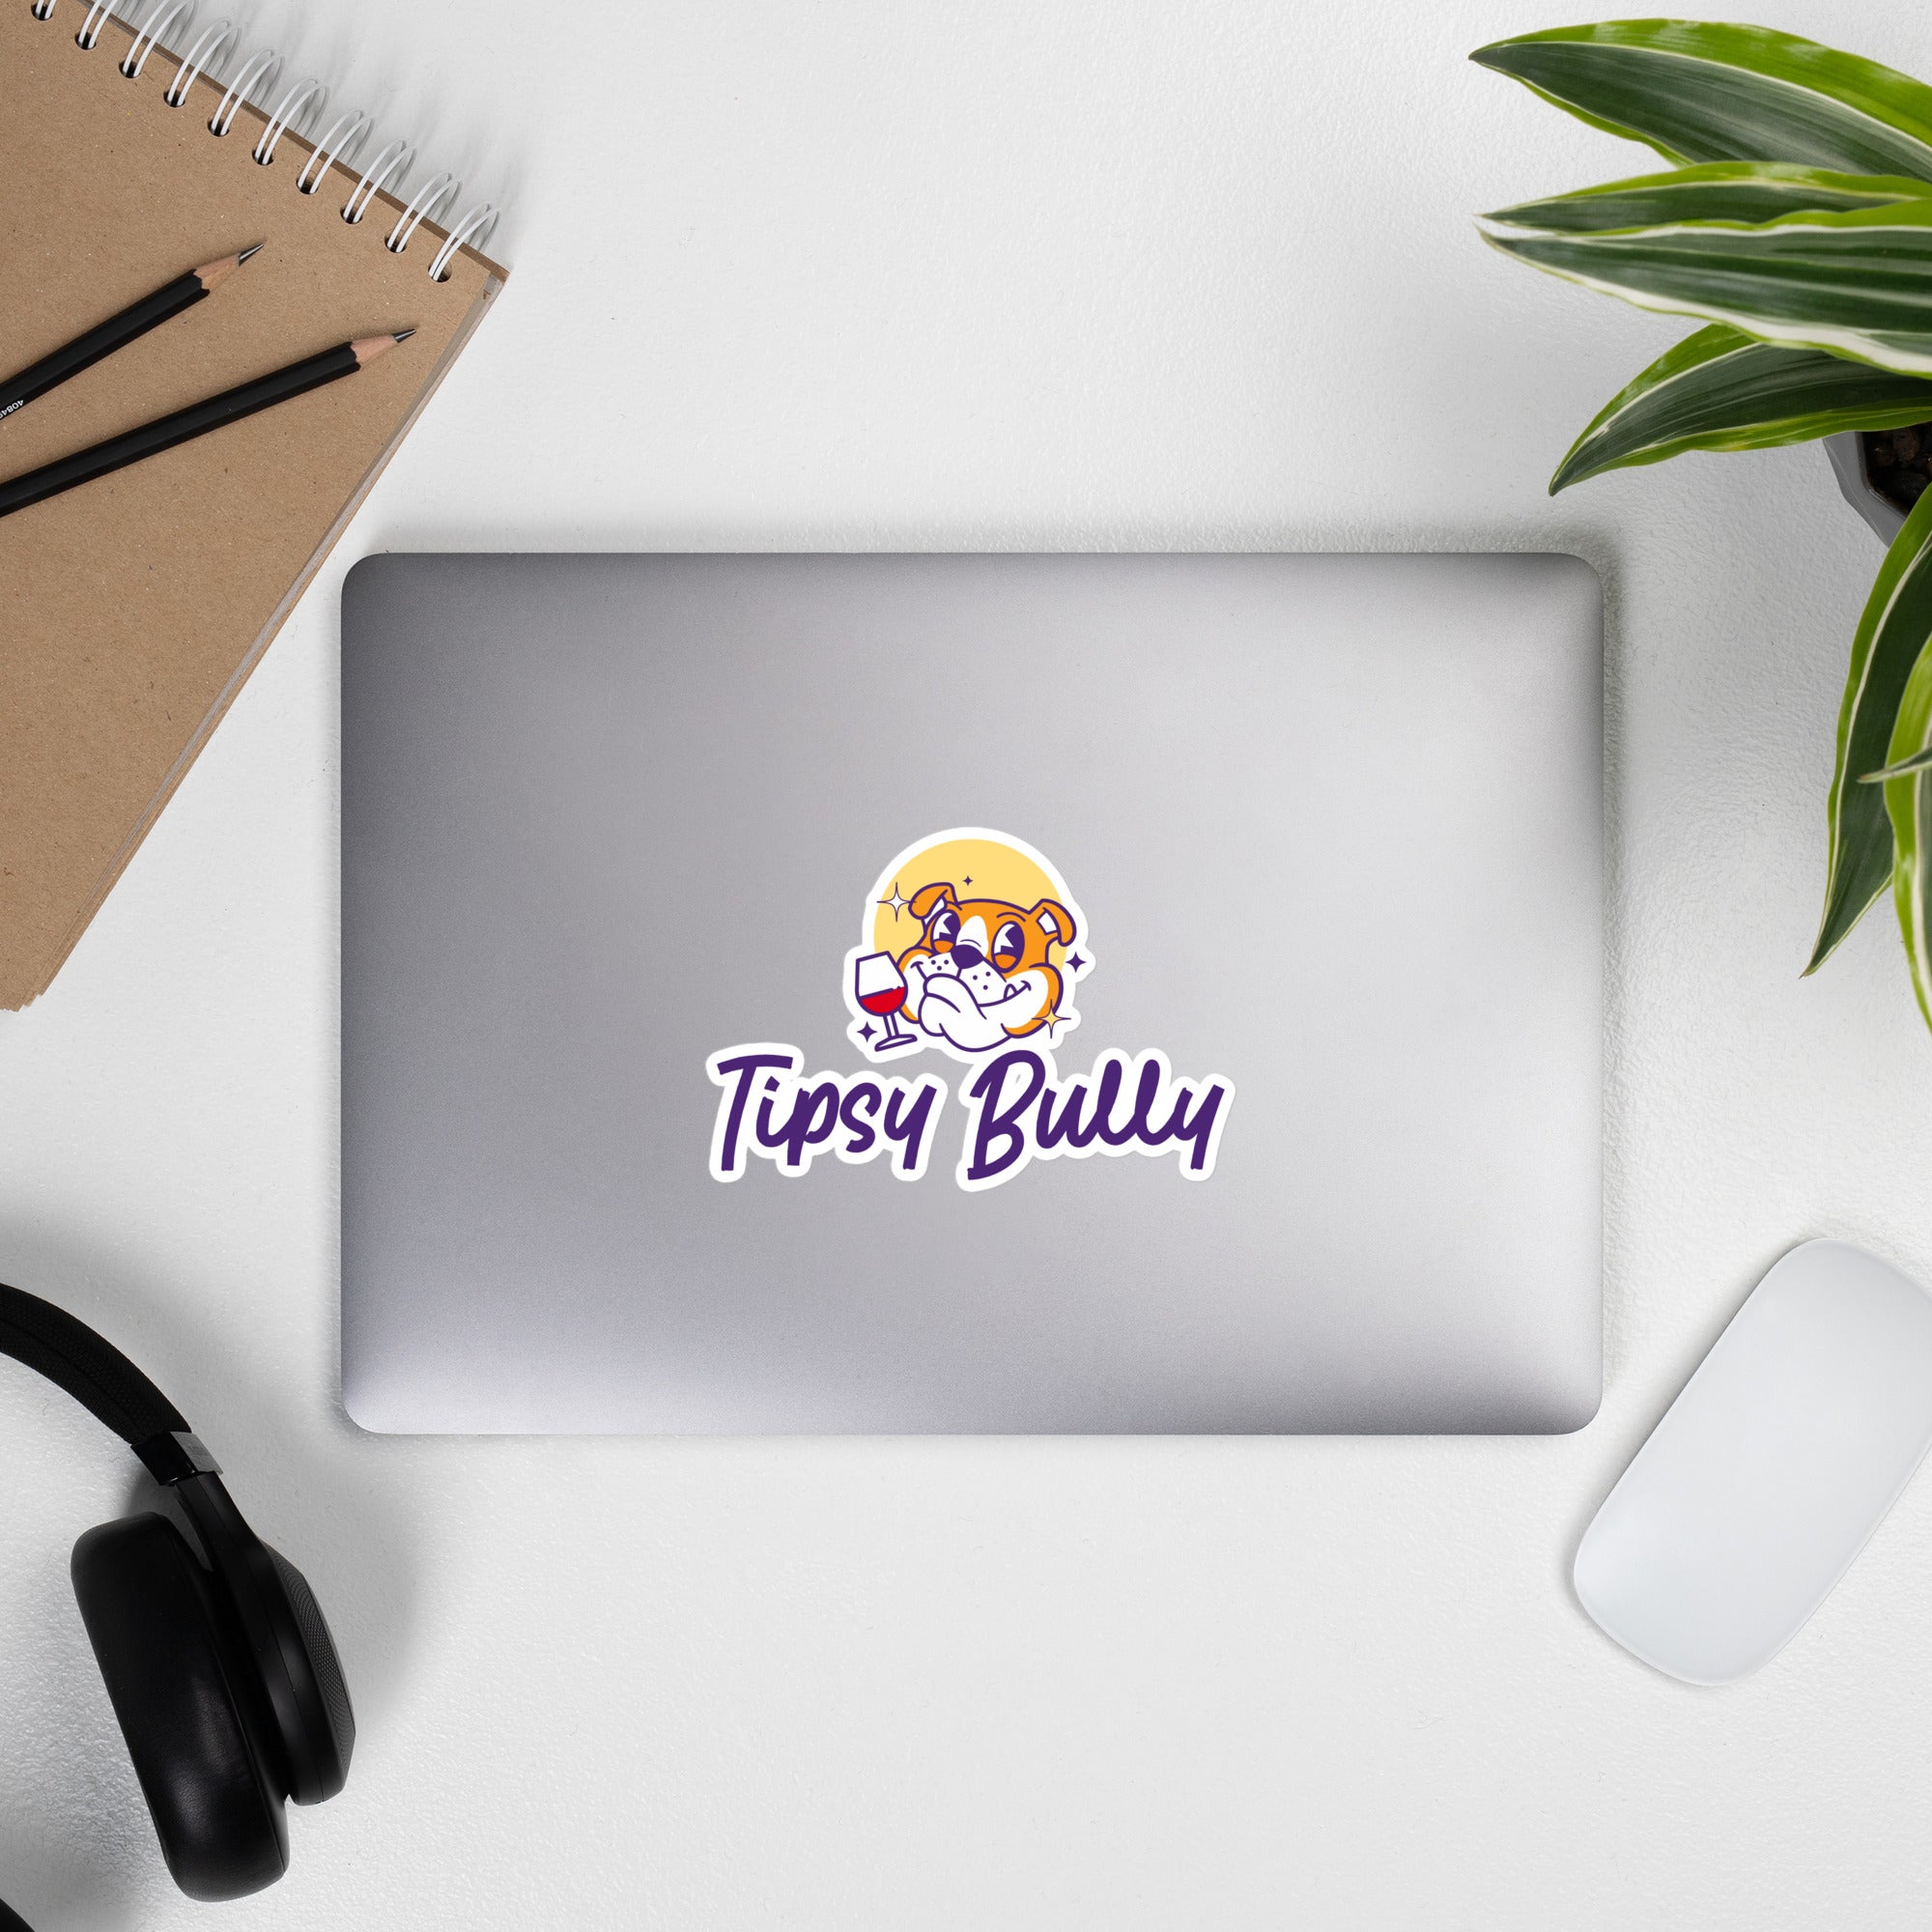 Tipsy Bully Logo Stickers: Paws, Pour, and Stick!